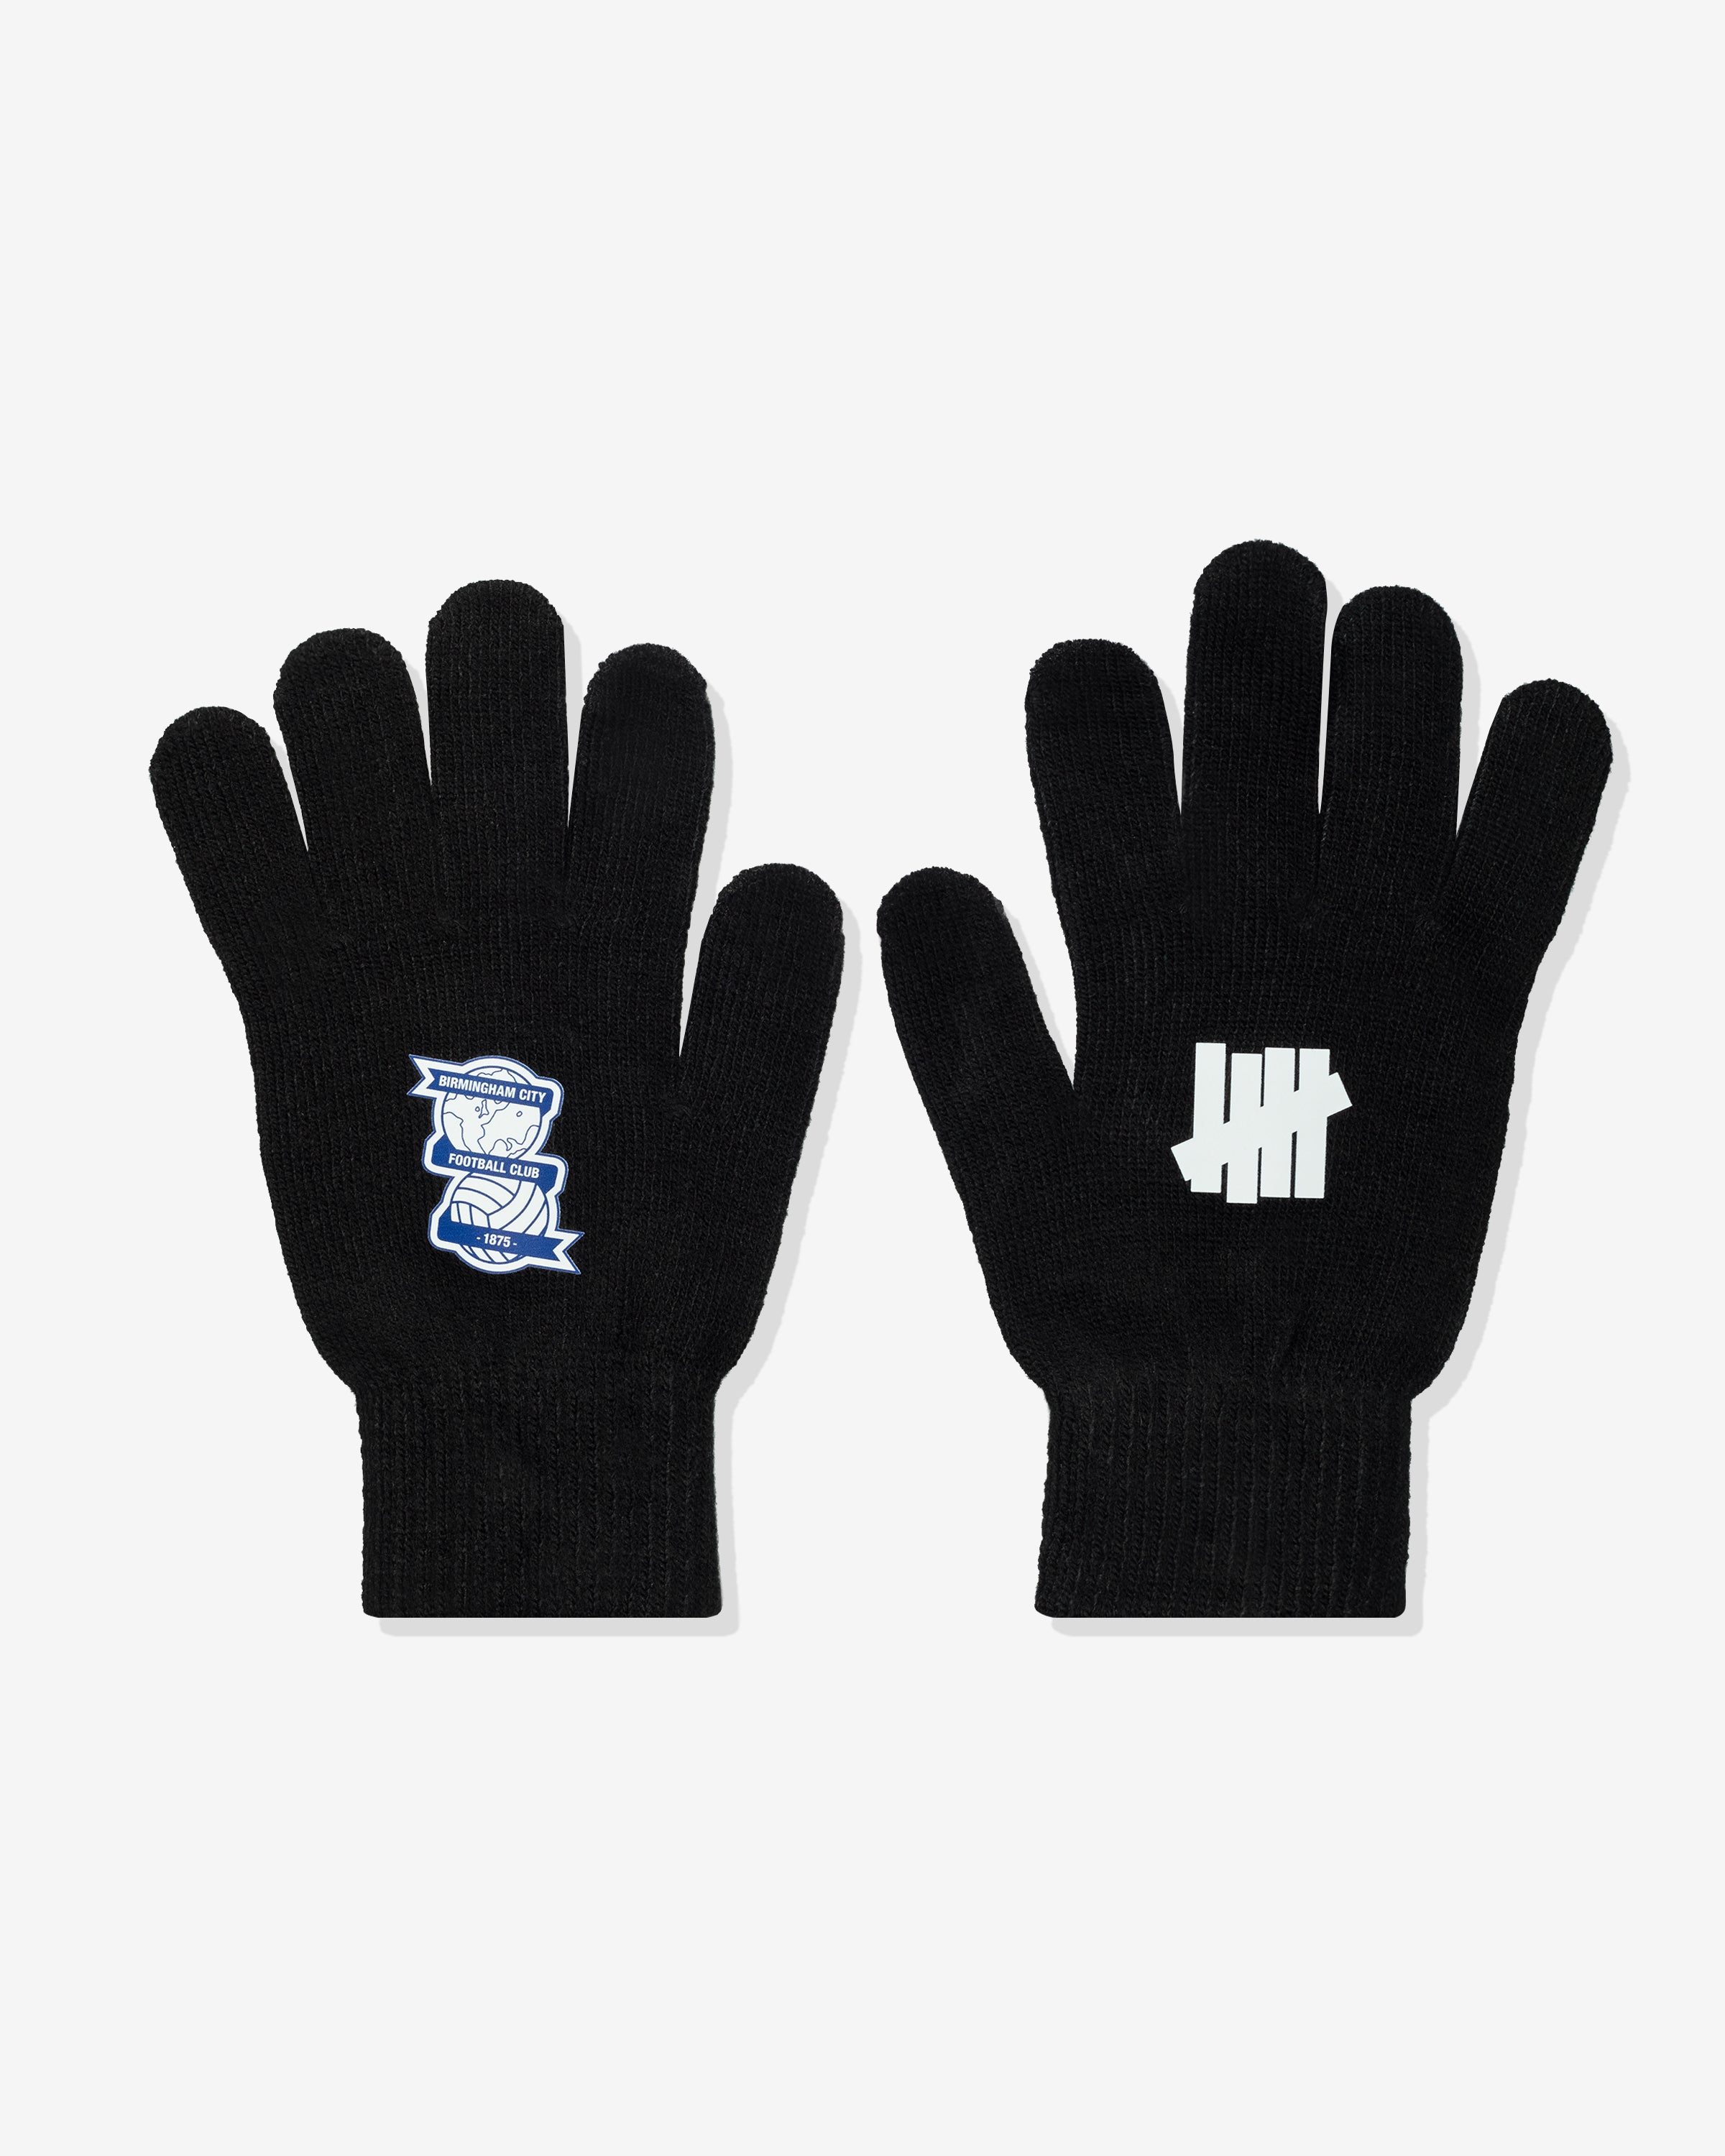 UNDEFEATED X BCFC GLOVES - BLACK